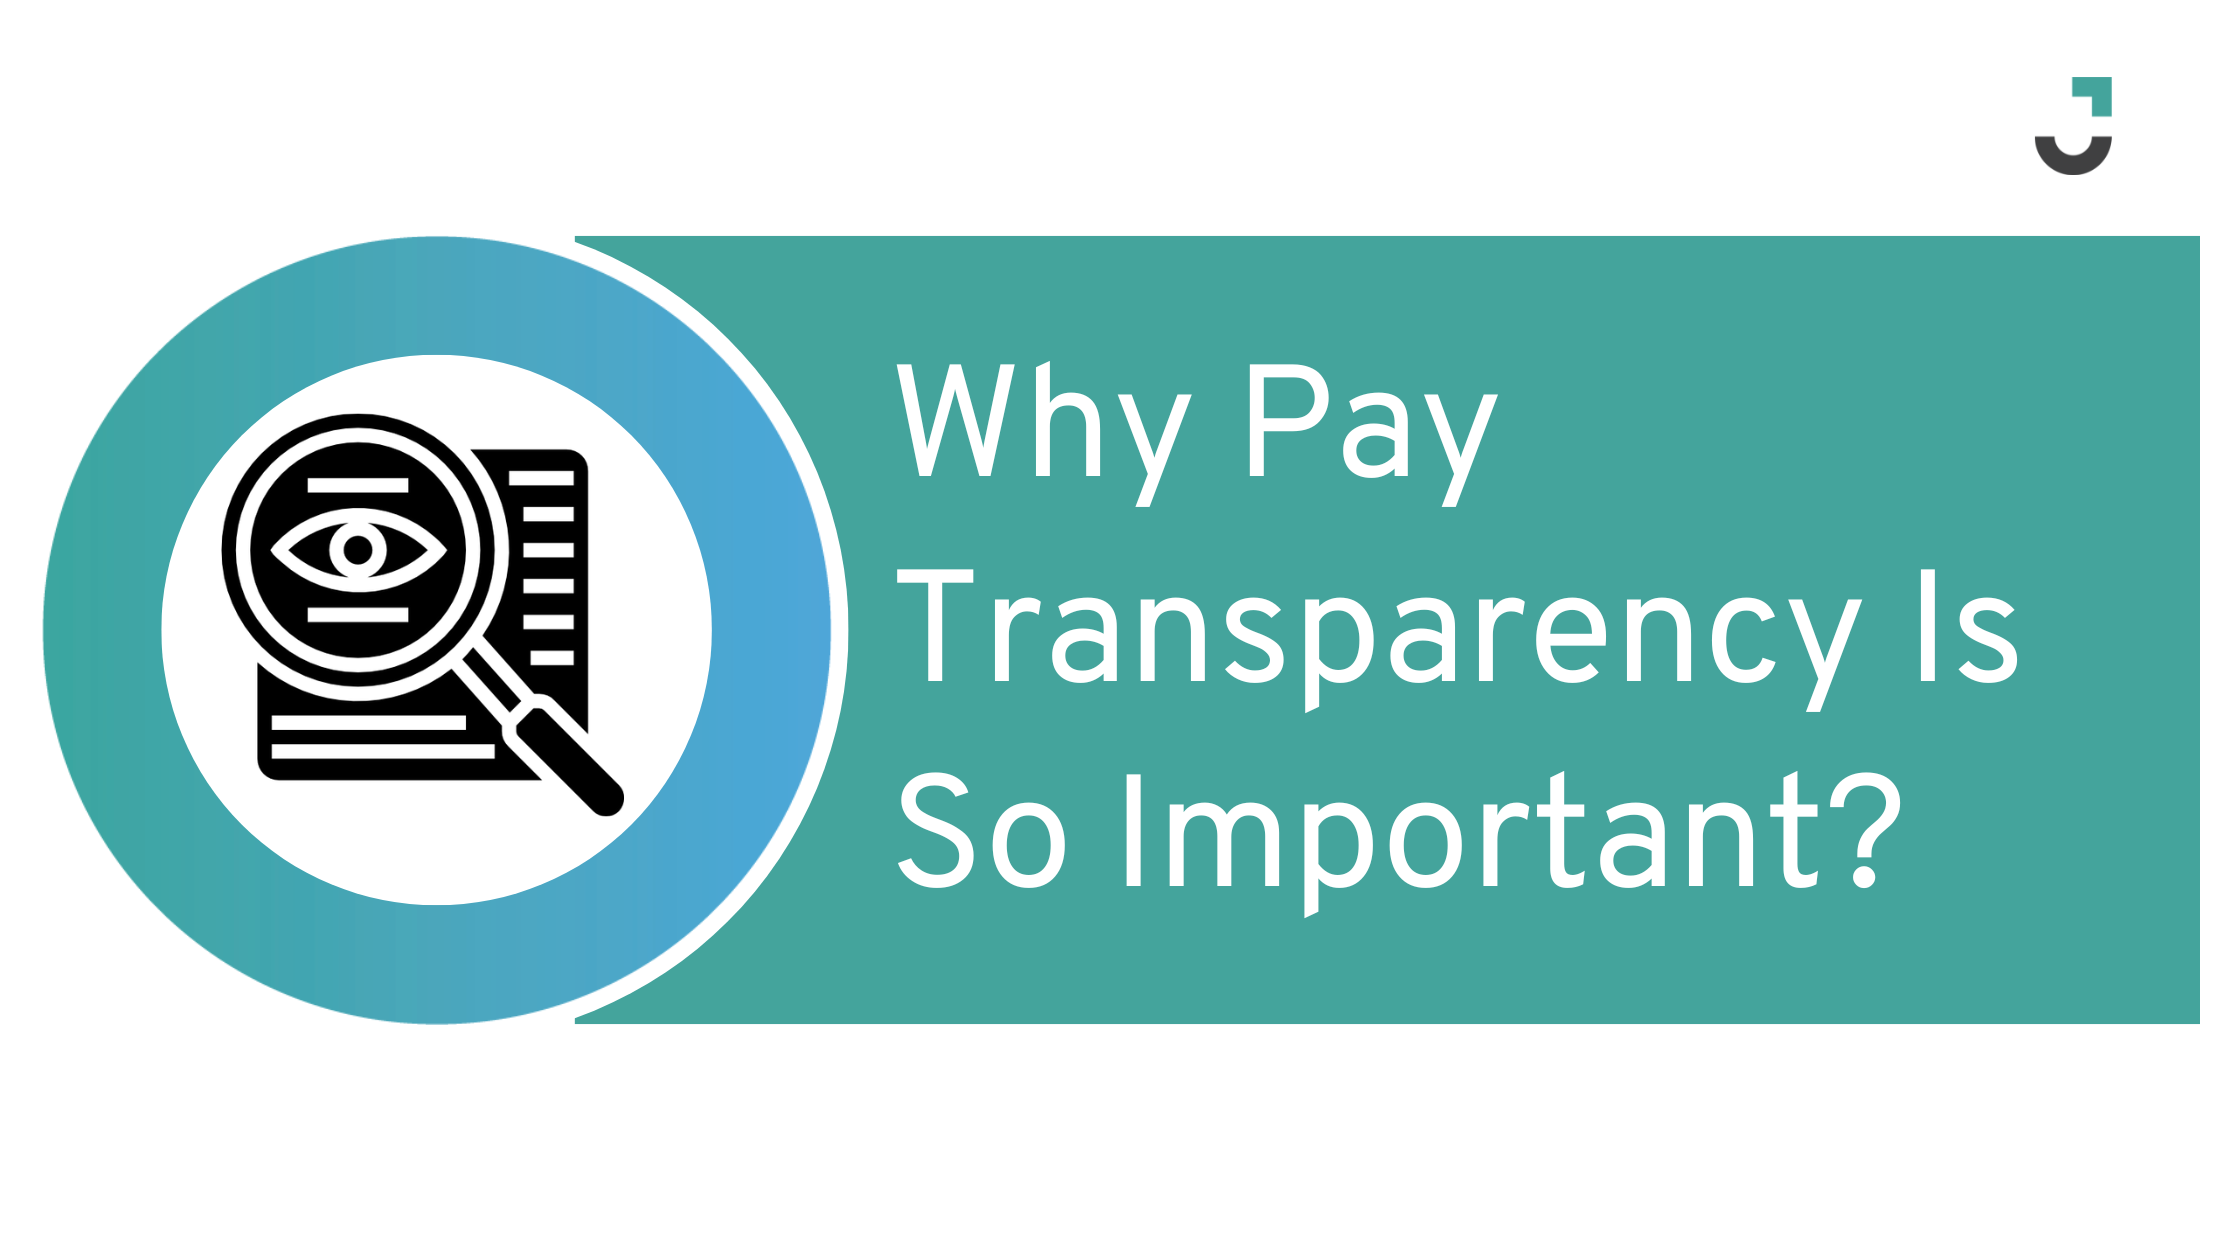 Why Pay Transparency Is So Important?